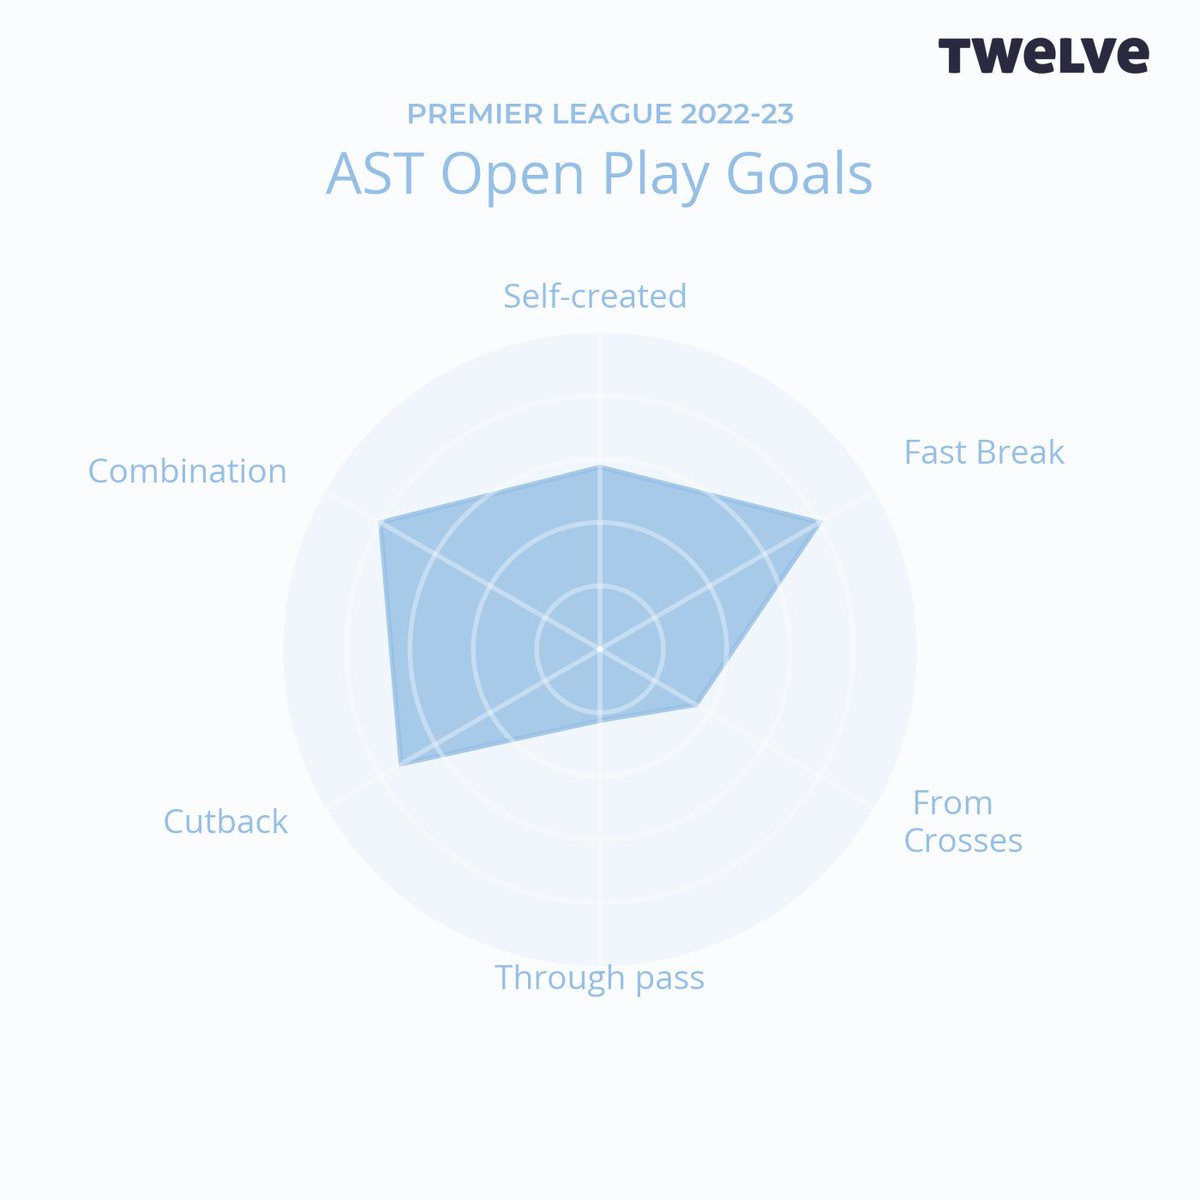 Alongside combination play and fast breaks, a high percentage of Aston Villa’s goals have come from cut-backs.

Image: @twelve_football | #AVFC